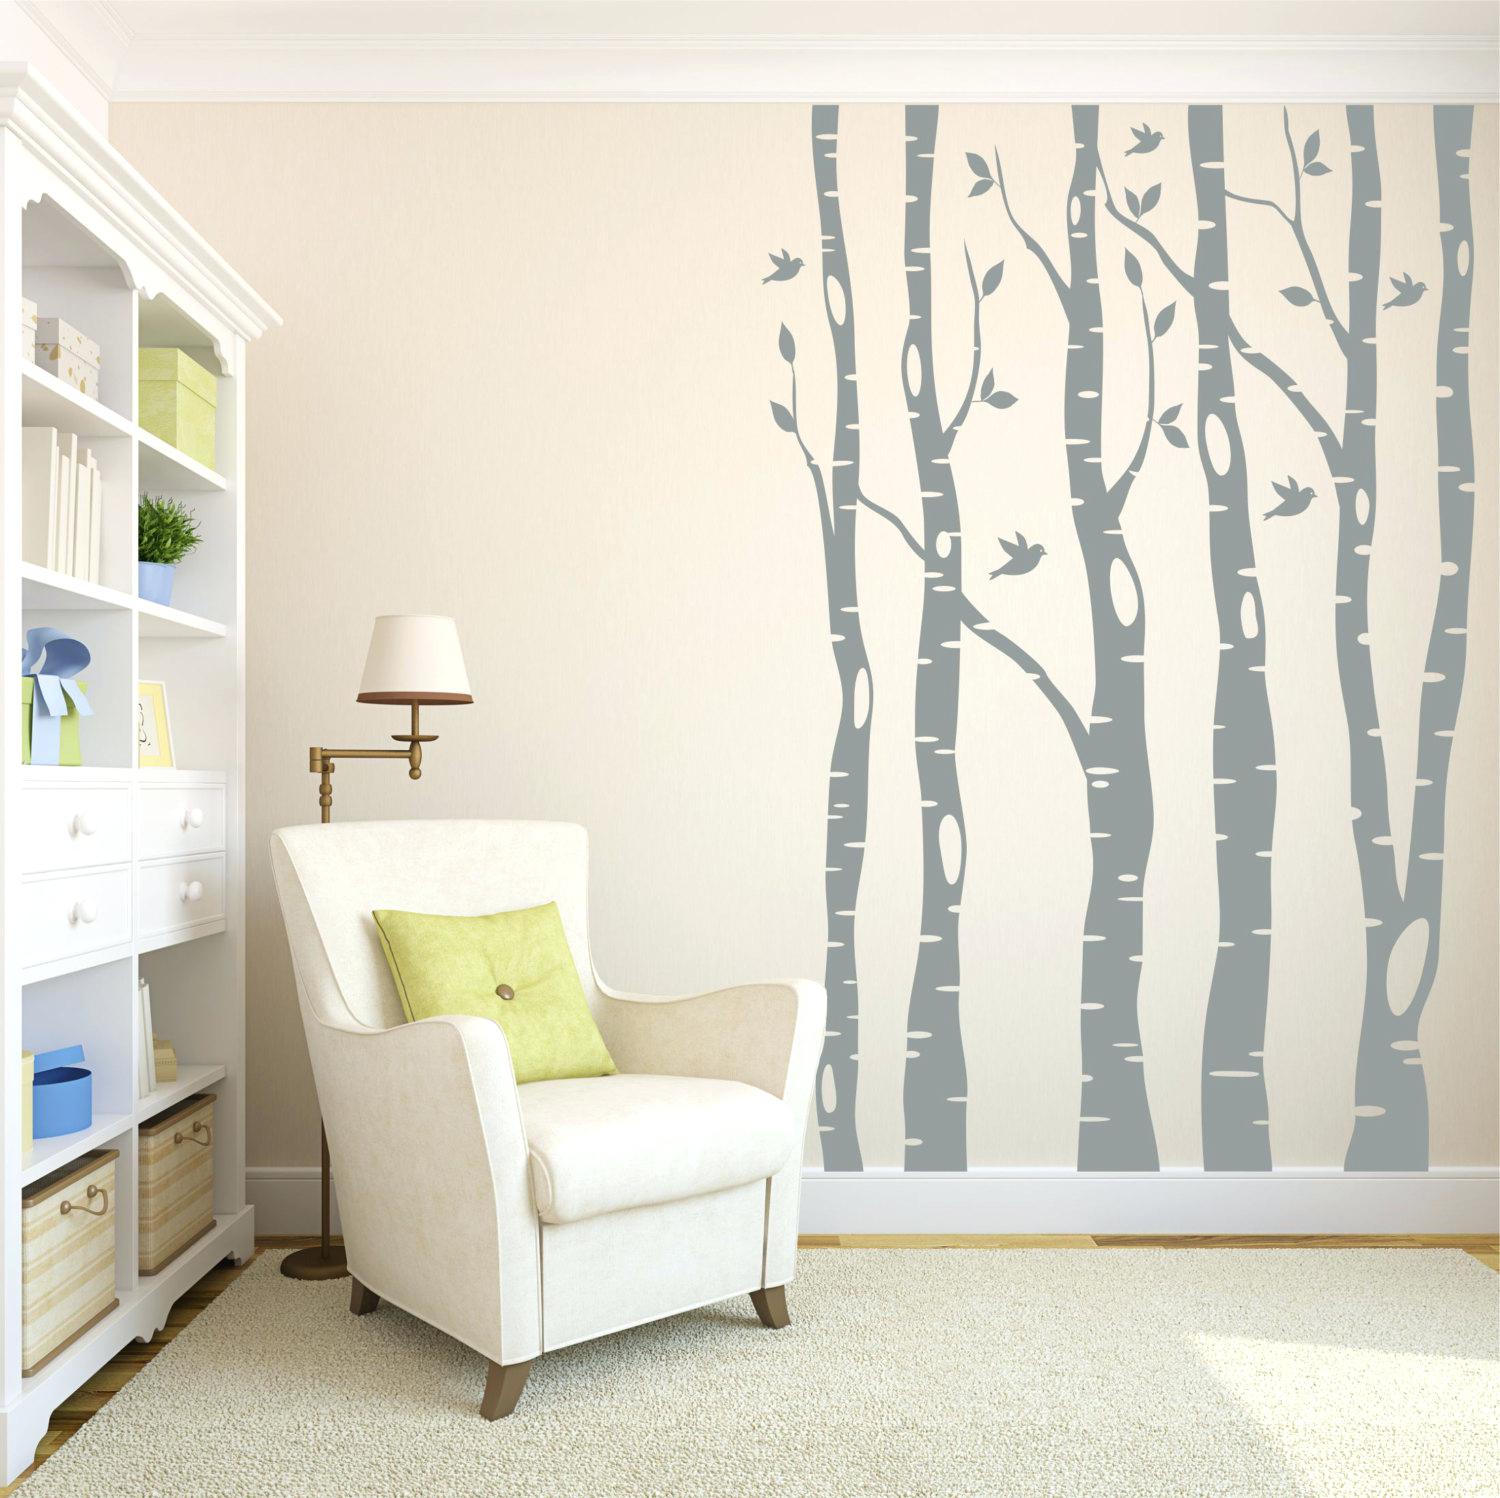 Trees Wall Decals And Gray Jungle Wall Mural With Monkey Decals For ...